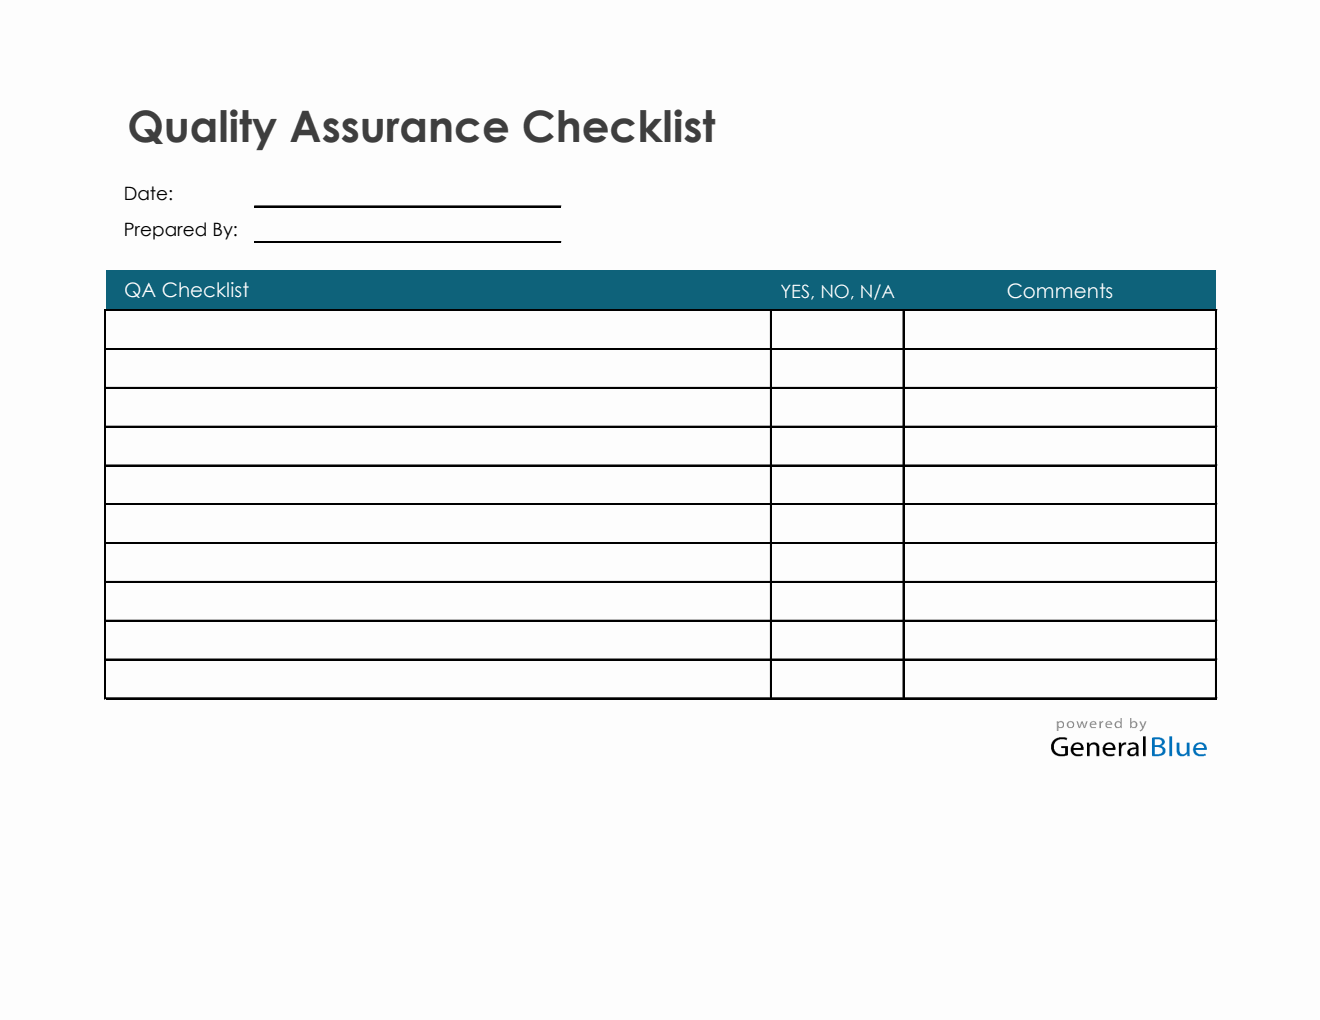 Quality Assurance Checklist in Excel